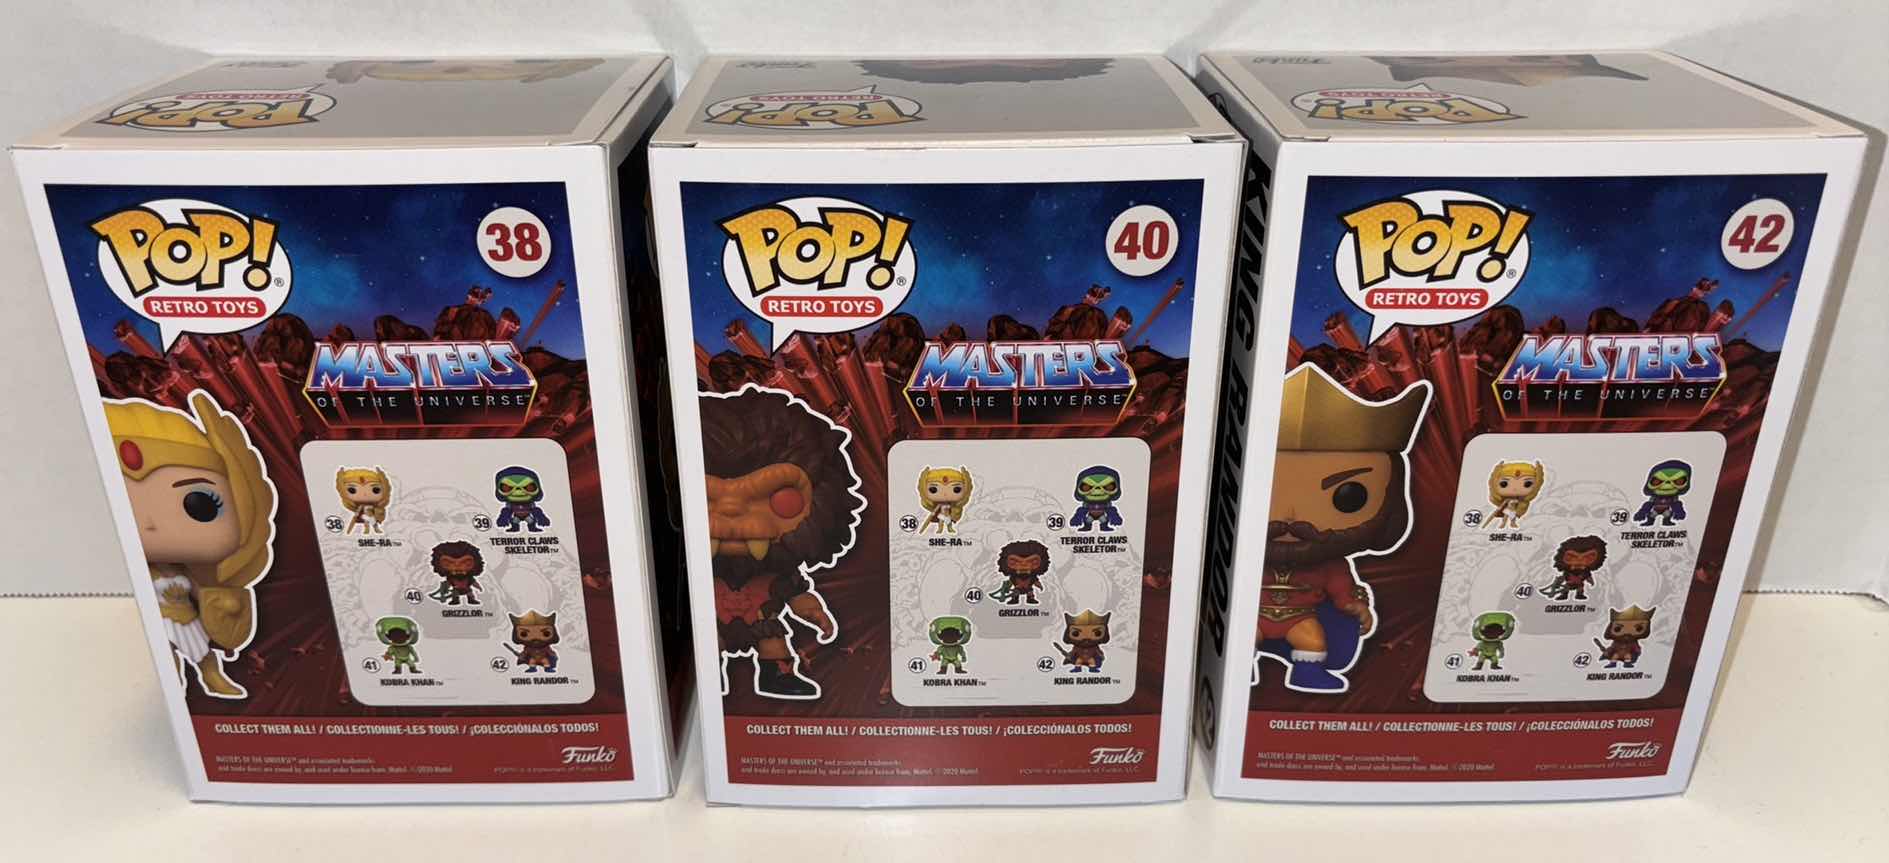 Photo 4 of NEW FUNKO POP! RETRO TOYS VINYL FIGURE MIXED 6-PACK, MASTERS OF THE UNIVERSE #38 SHE-RA GLOW IN THE DARK LIMITED EDITION EXCLUSIVE SPECIALTY SERIES (2), #40 GRIZZLOR (2) & #42 KING RANDOR (2)